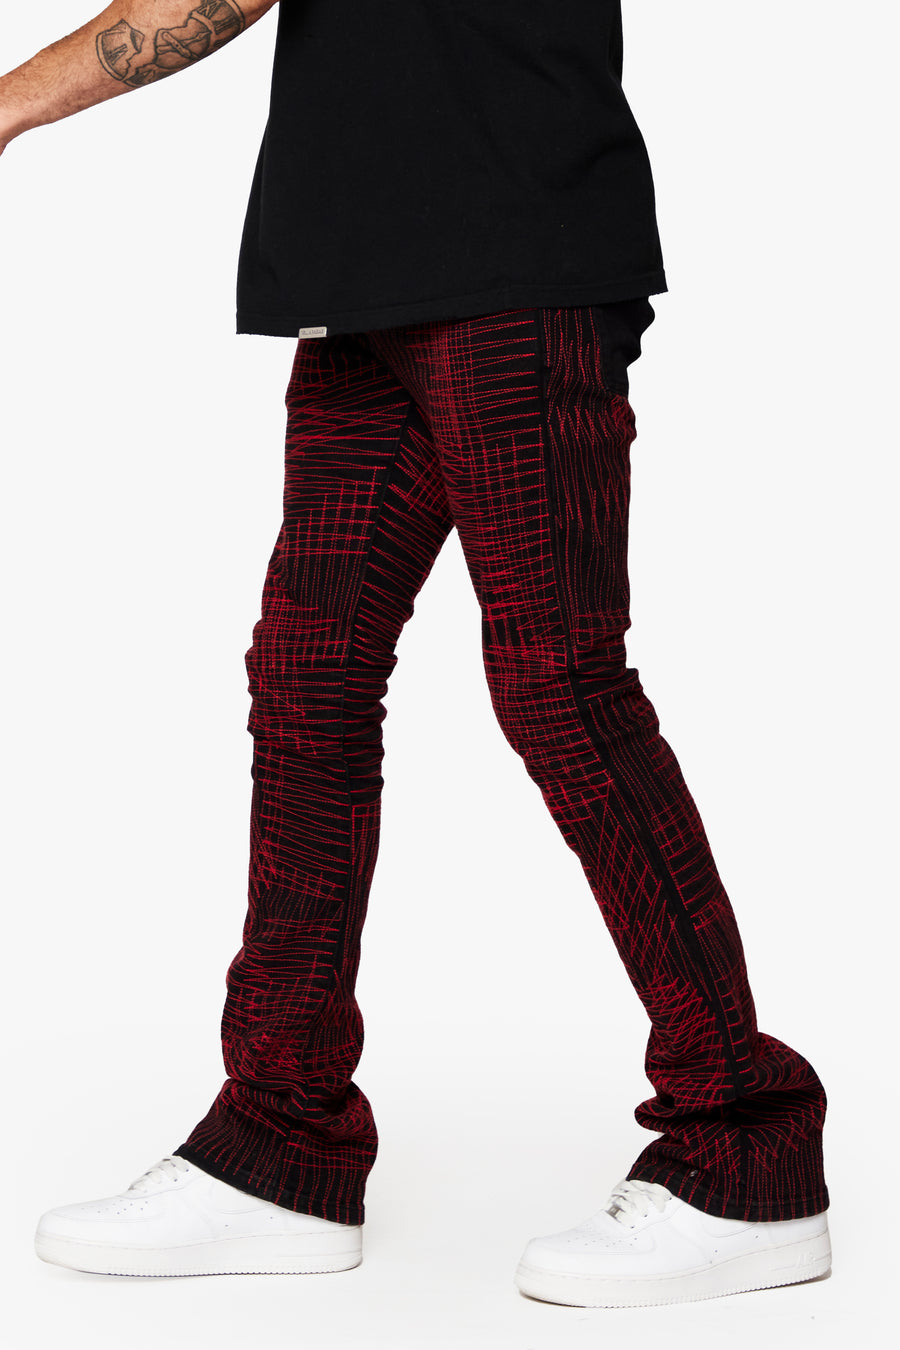 "MR. EMBROIDERY" CRIMSON NOIR STACKED FLARE JEAN